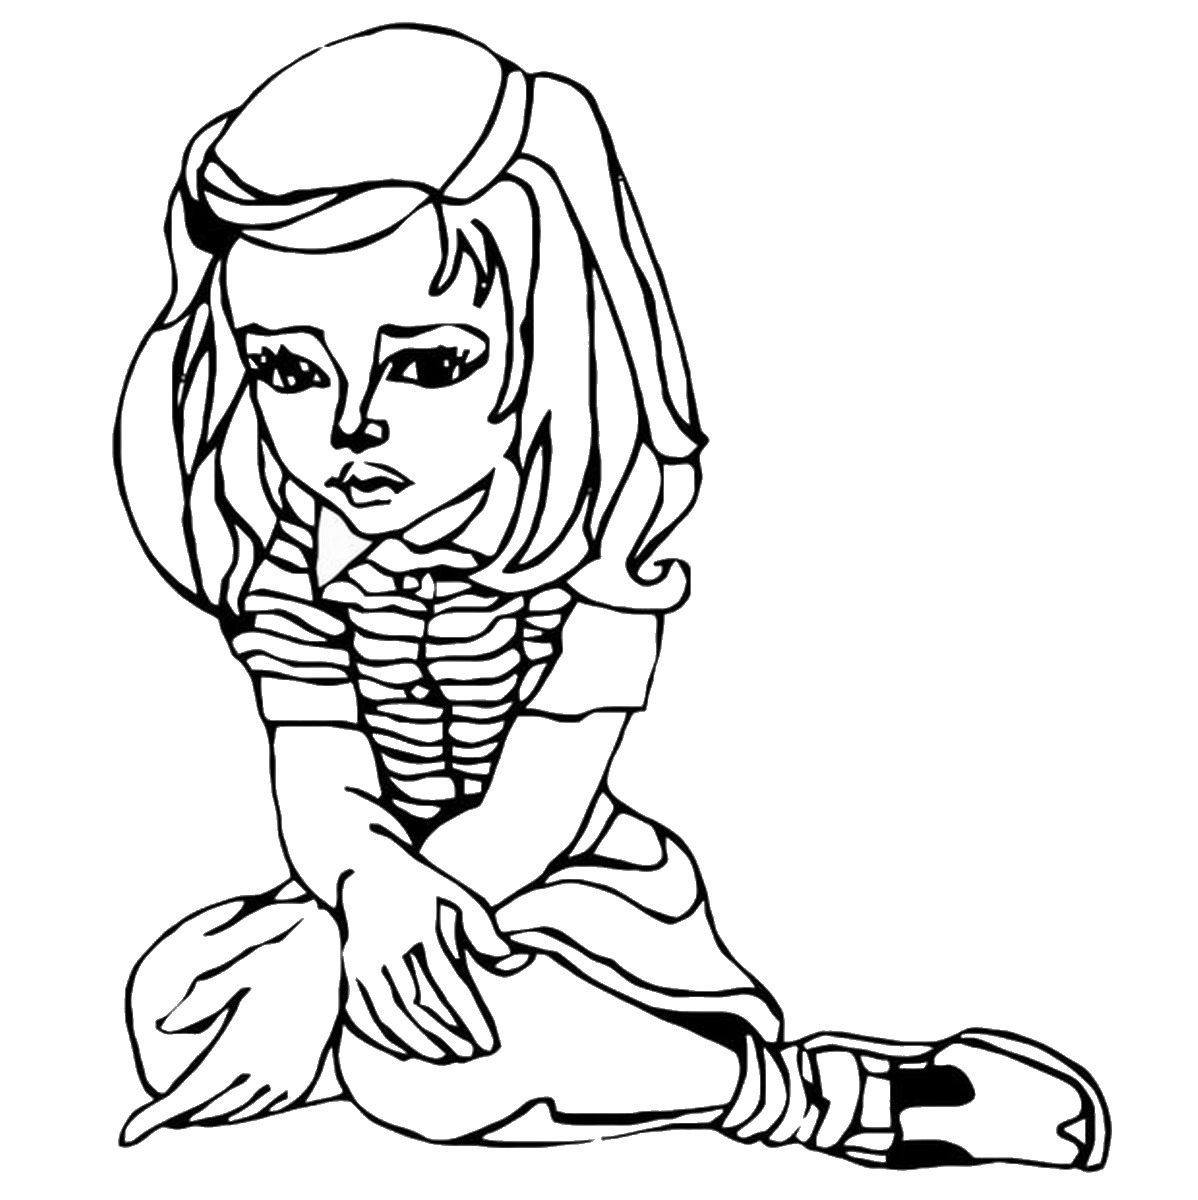 Feelings Coloring Pages